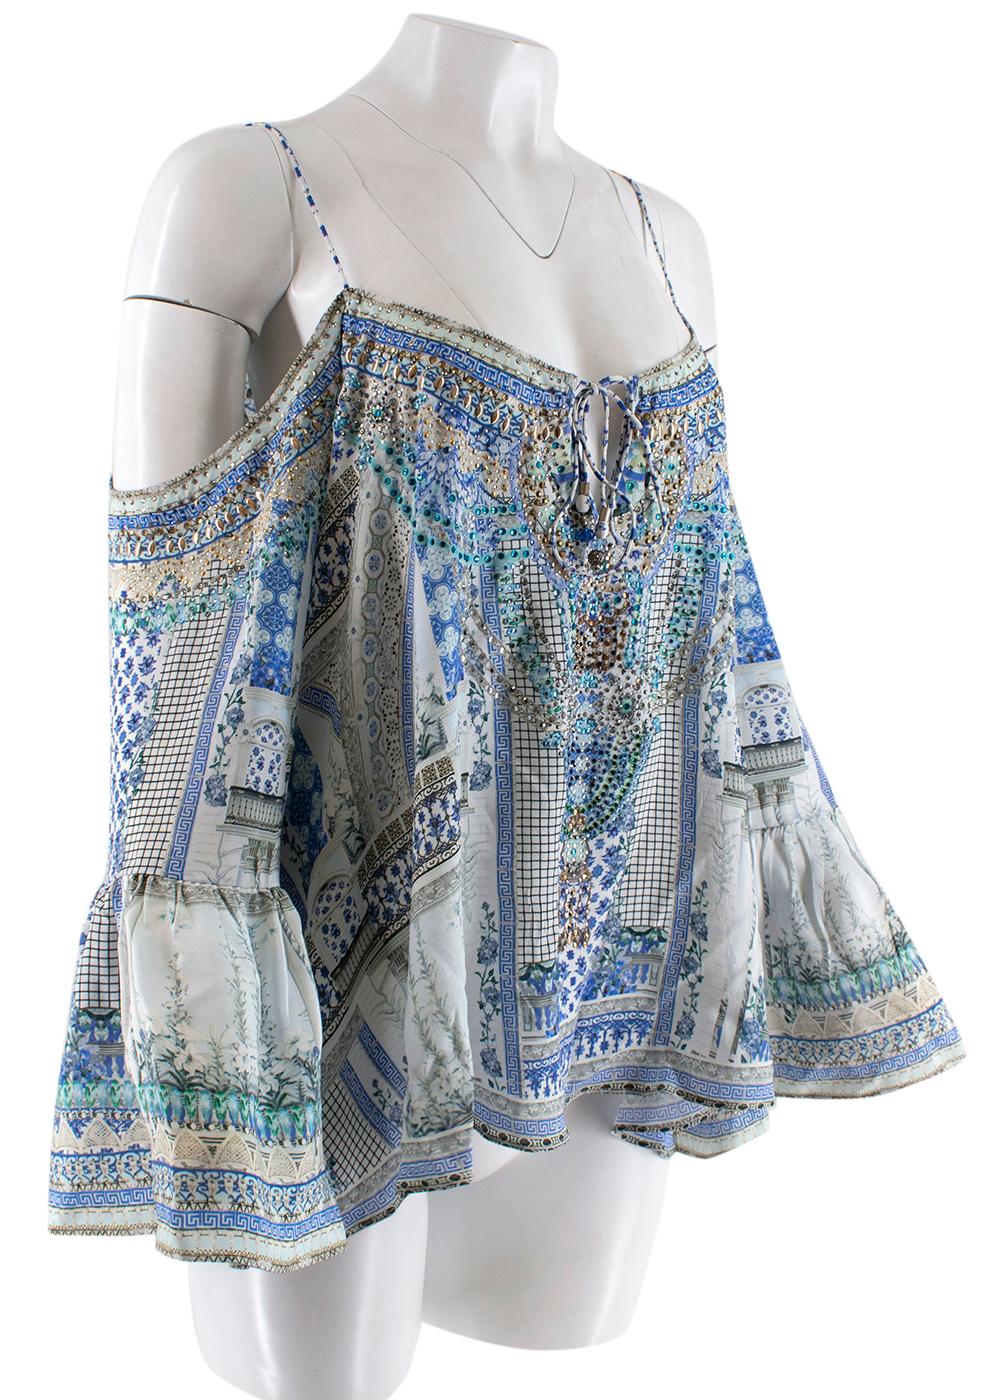 Camilla Salvador Summer Print Drop Shoulder Top & Side Pleat Pants

- Designed in Australia 
-Made in India 
-Bohemian style perfect for the warmer coming months  
- Beads details on the waistband and top chest and shoulders 
- Slender shoulder